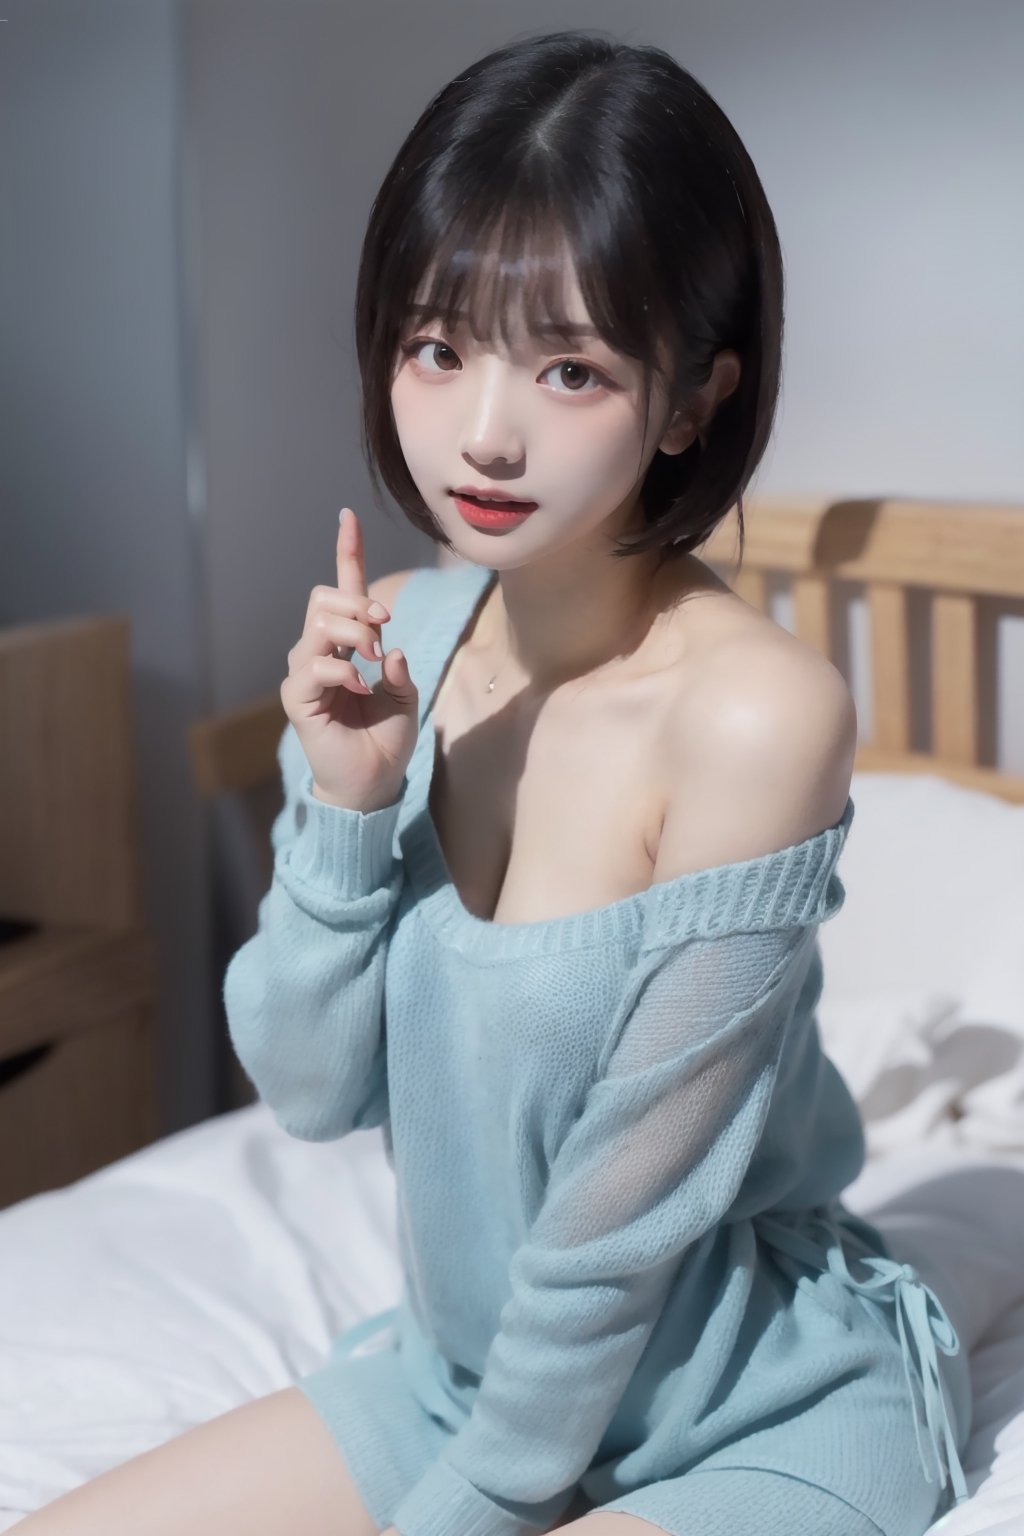 8k 3d  Reality, (best quality), (masterpiece), (korean pretty girl), a girl lying in bed, making humorous gestures, real face, a natural facial expression, clean and white skin, see blue eyes, a small natural finger, thin, small, and pretty hands, open shoulder Sweater shirt, micro short Skirt, tied short brown hair, Reality 3d background, ,zzenny_n,1 girl,hold_up_legs,nightgown